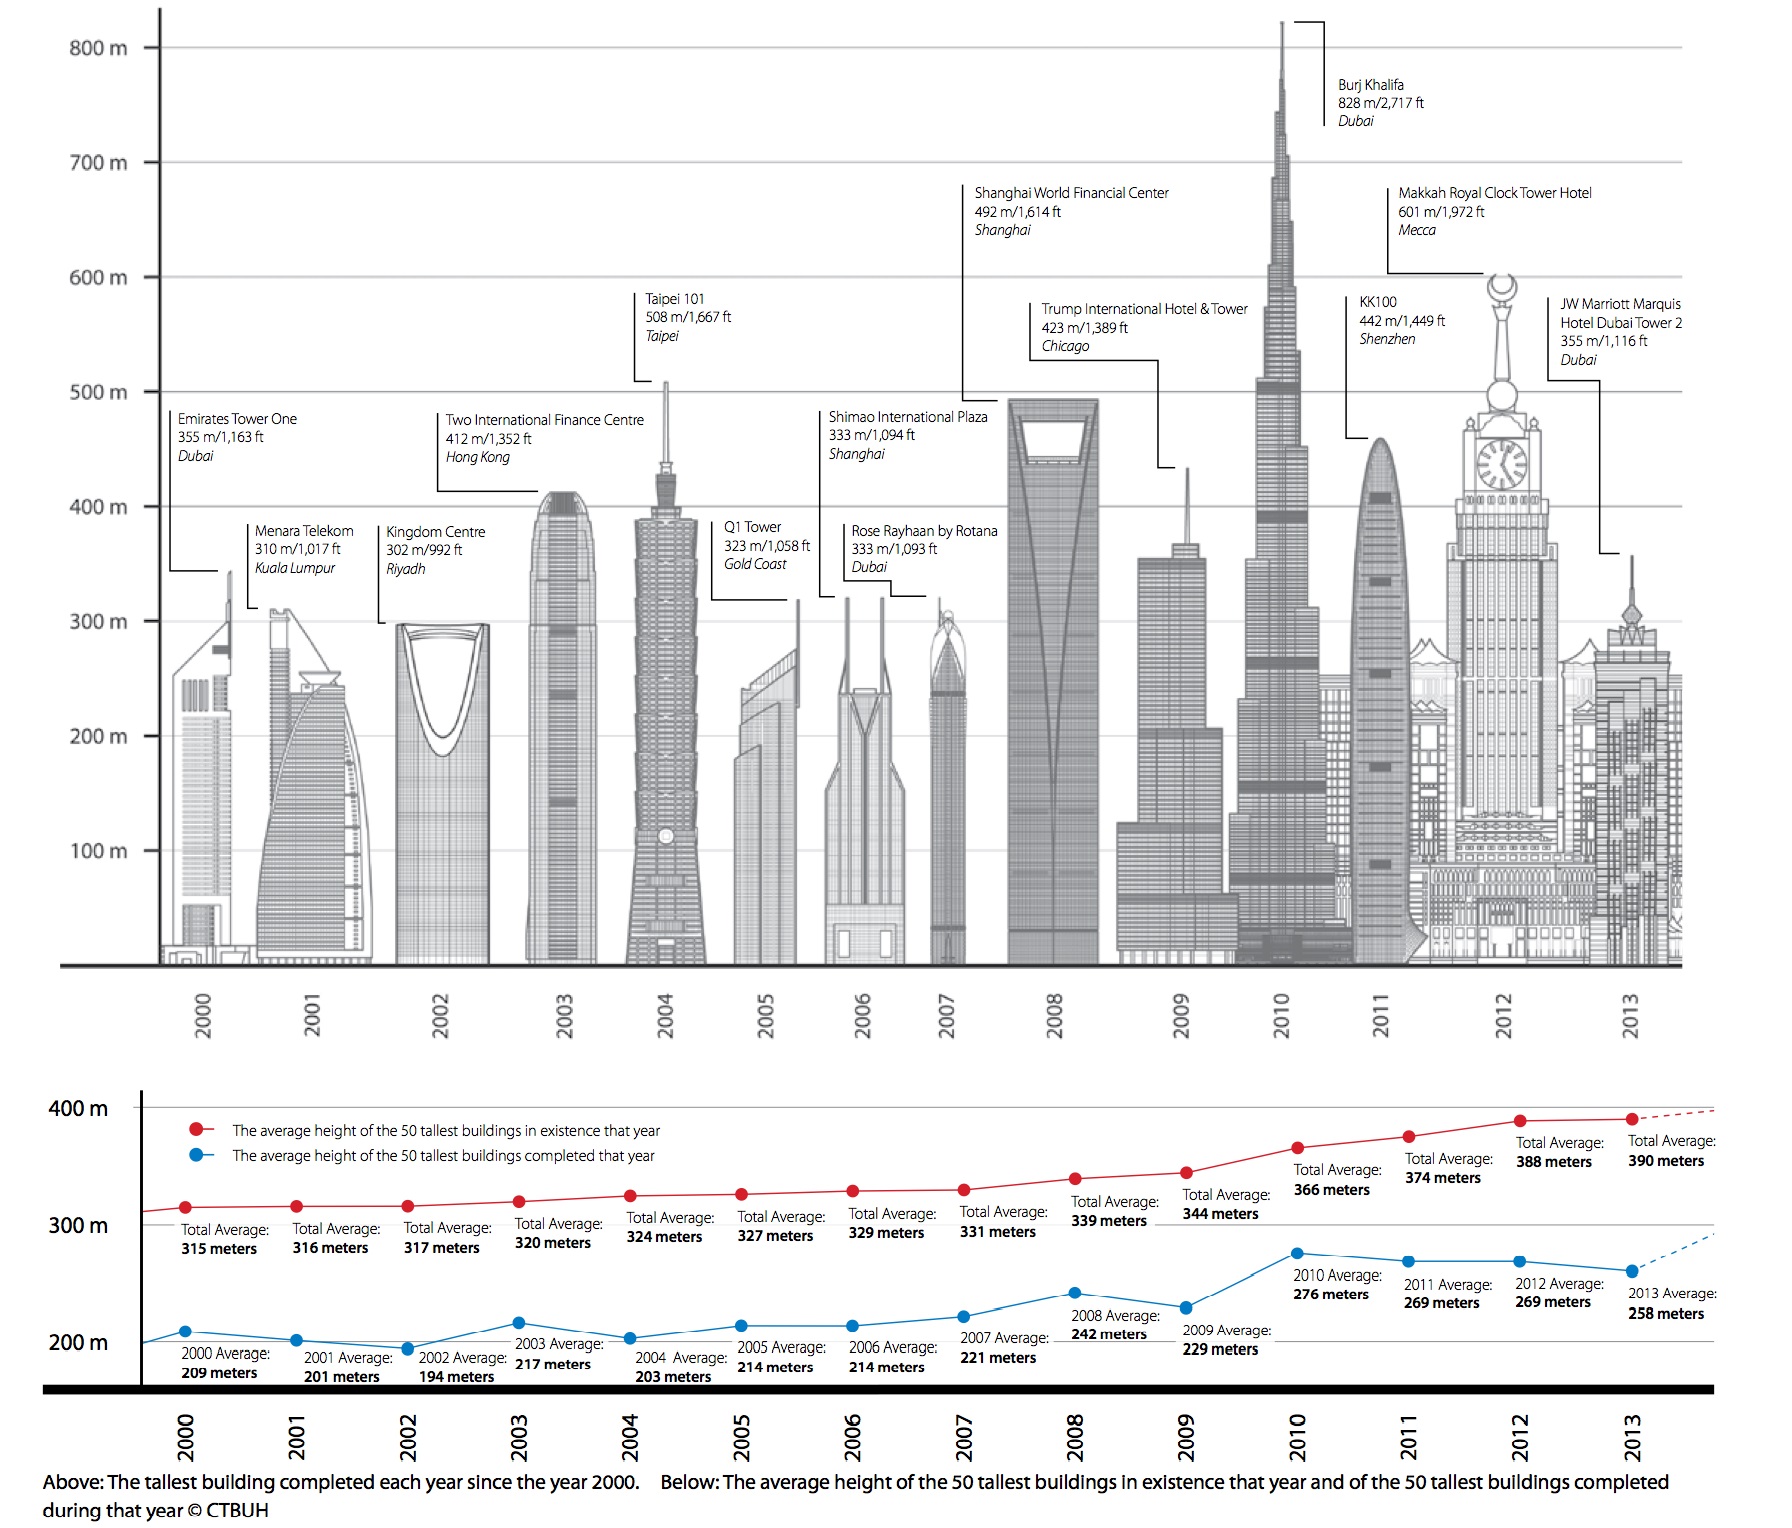 Up to 90 tall buildings of 200m or more in height are expected to be comple...